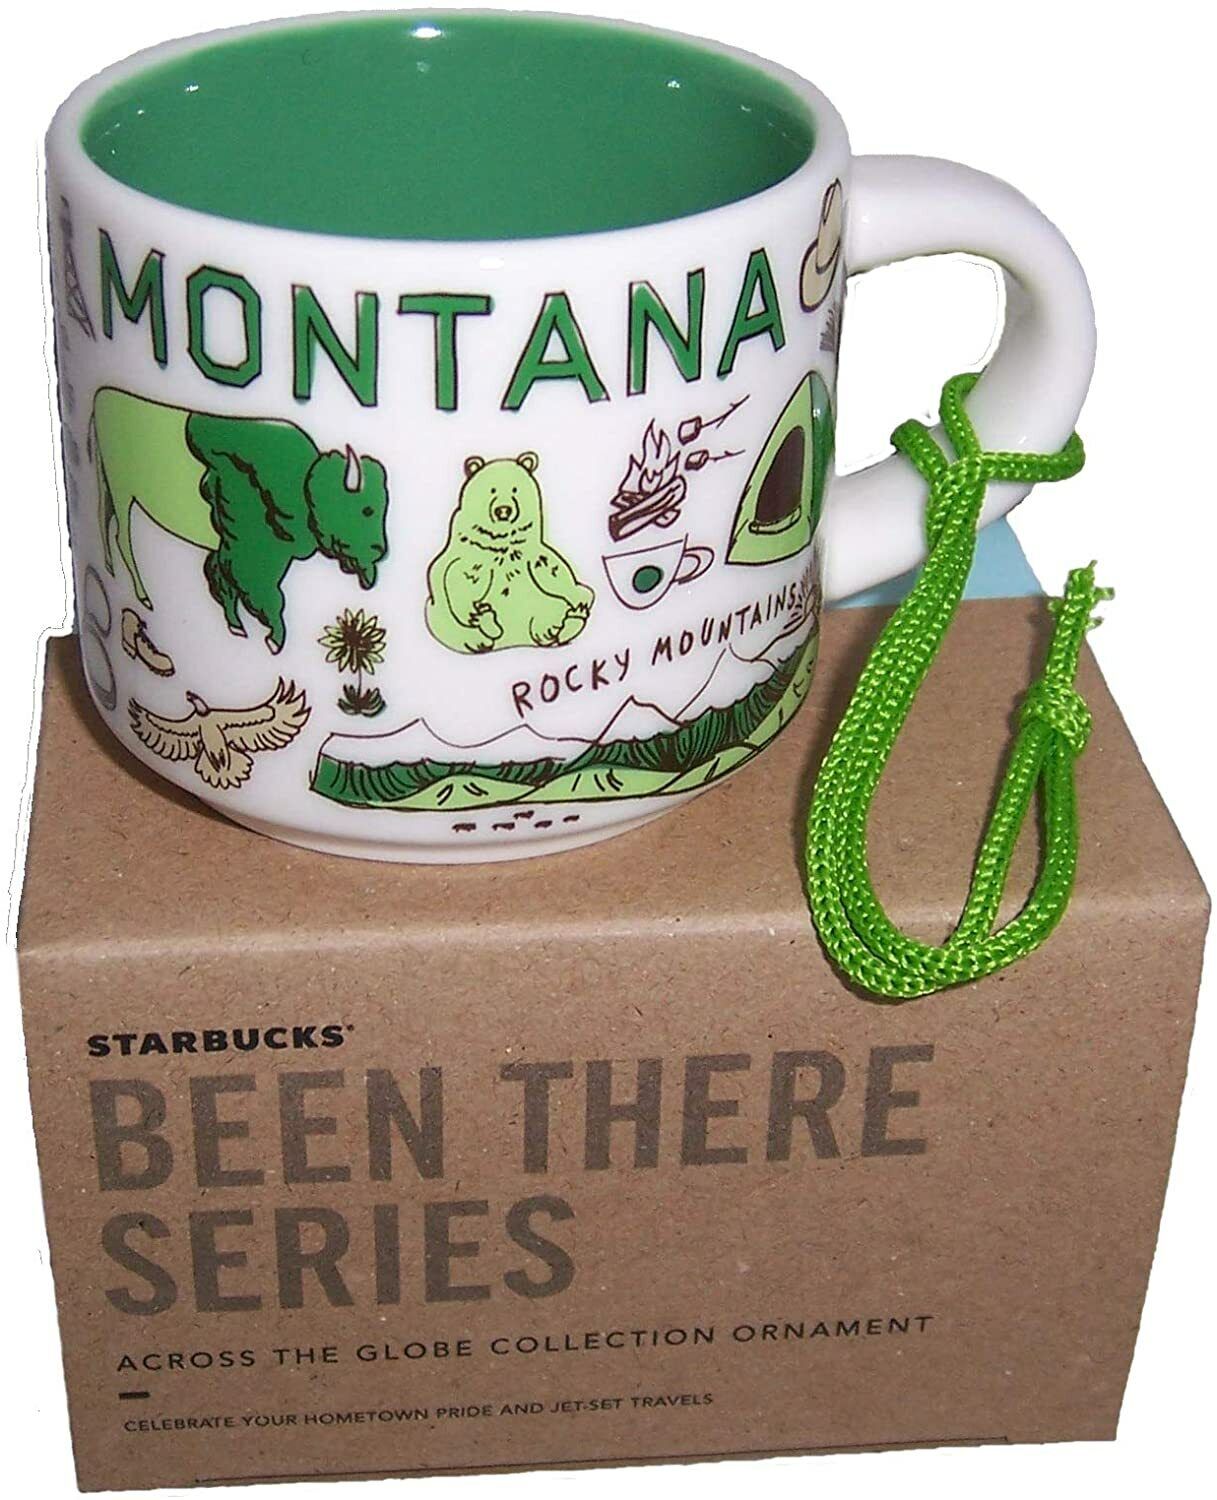 Starbucks Montana Been There Series, 2 Ounce Espresso, Cappuccino Cup, Ornament